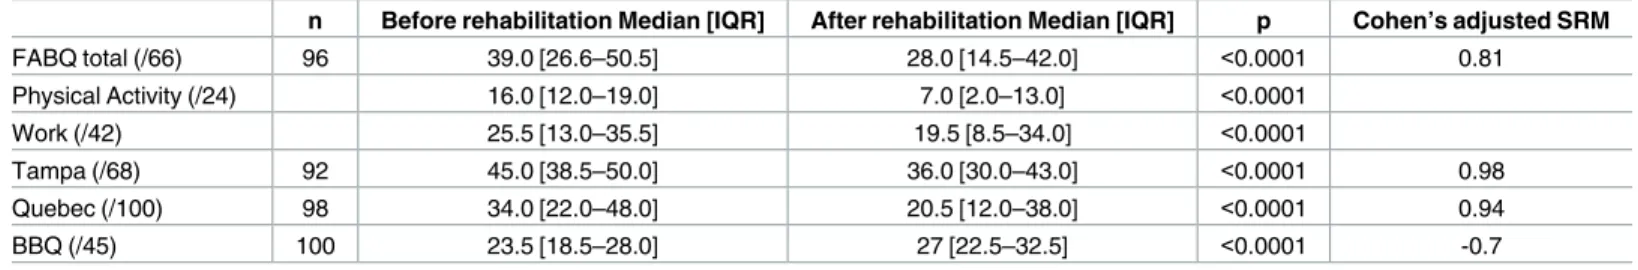 Table 2. Responsiveness of the BBQ compared to different scores before and after the rehabilitation procedure.